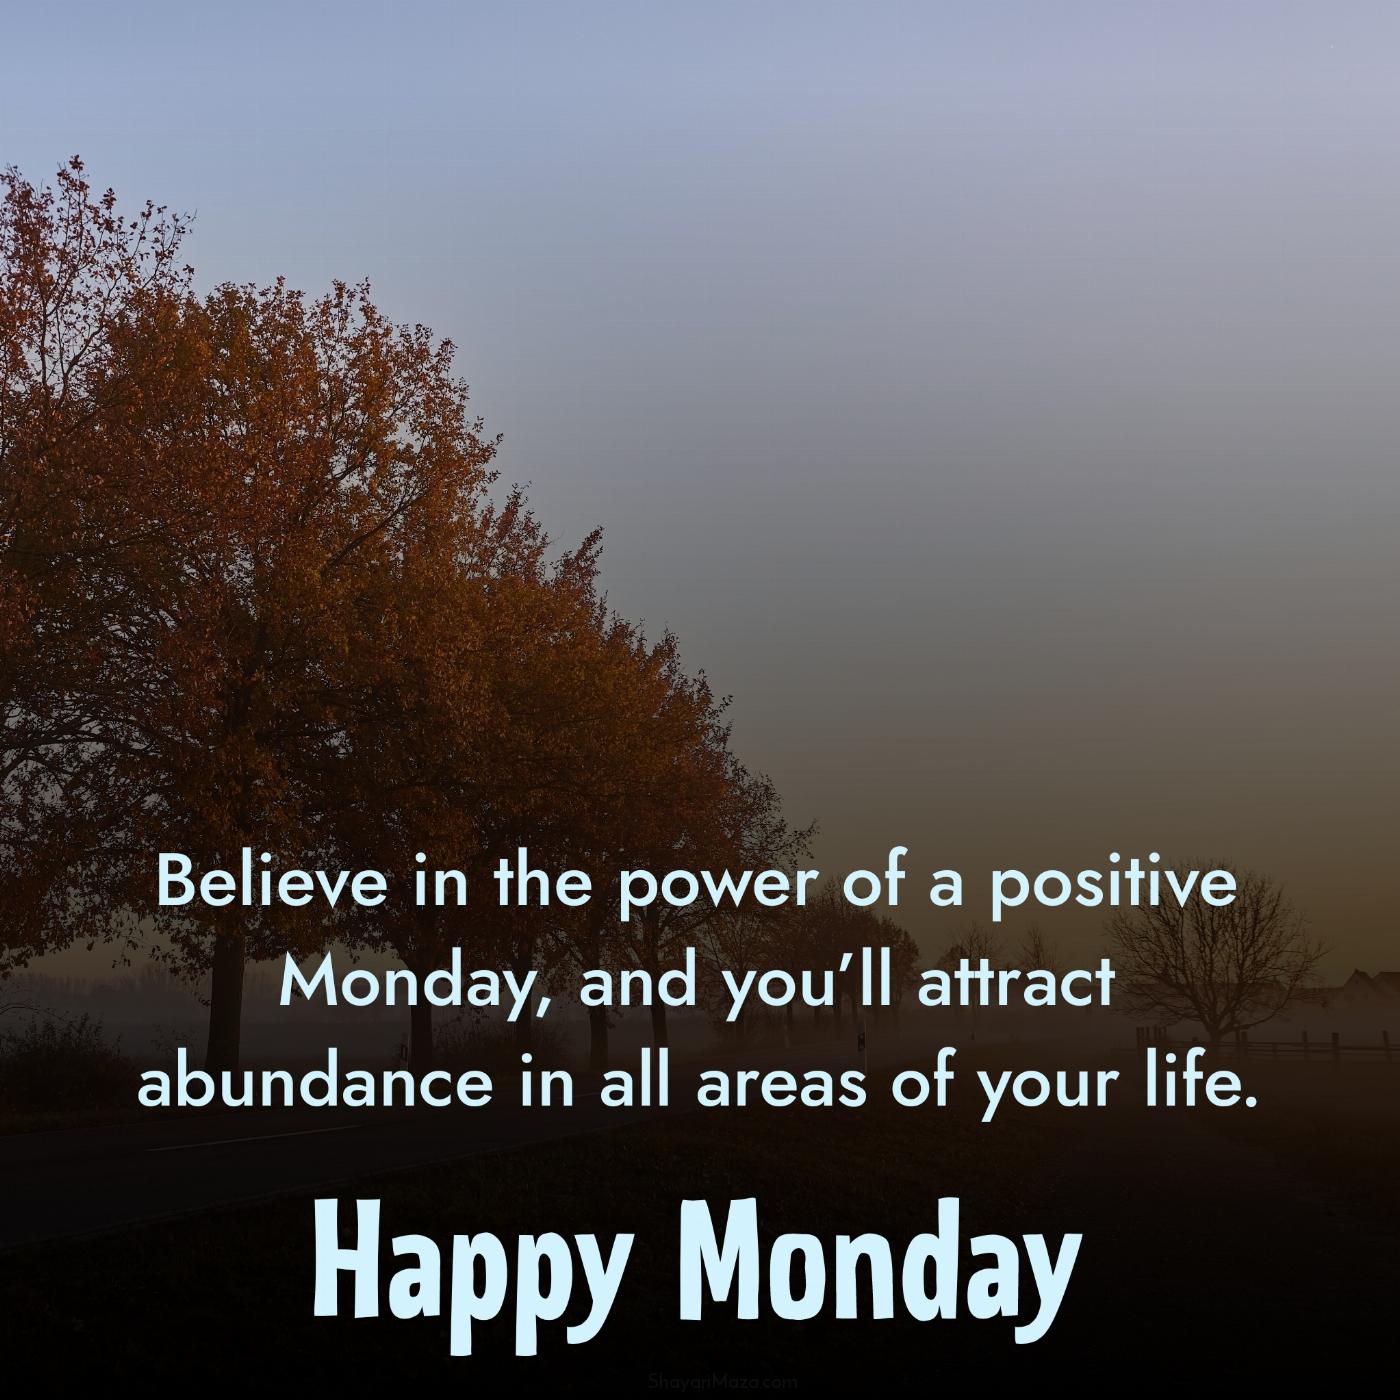 Believe in the power of a positive Monday and youll attract abundance